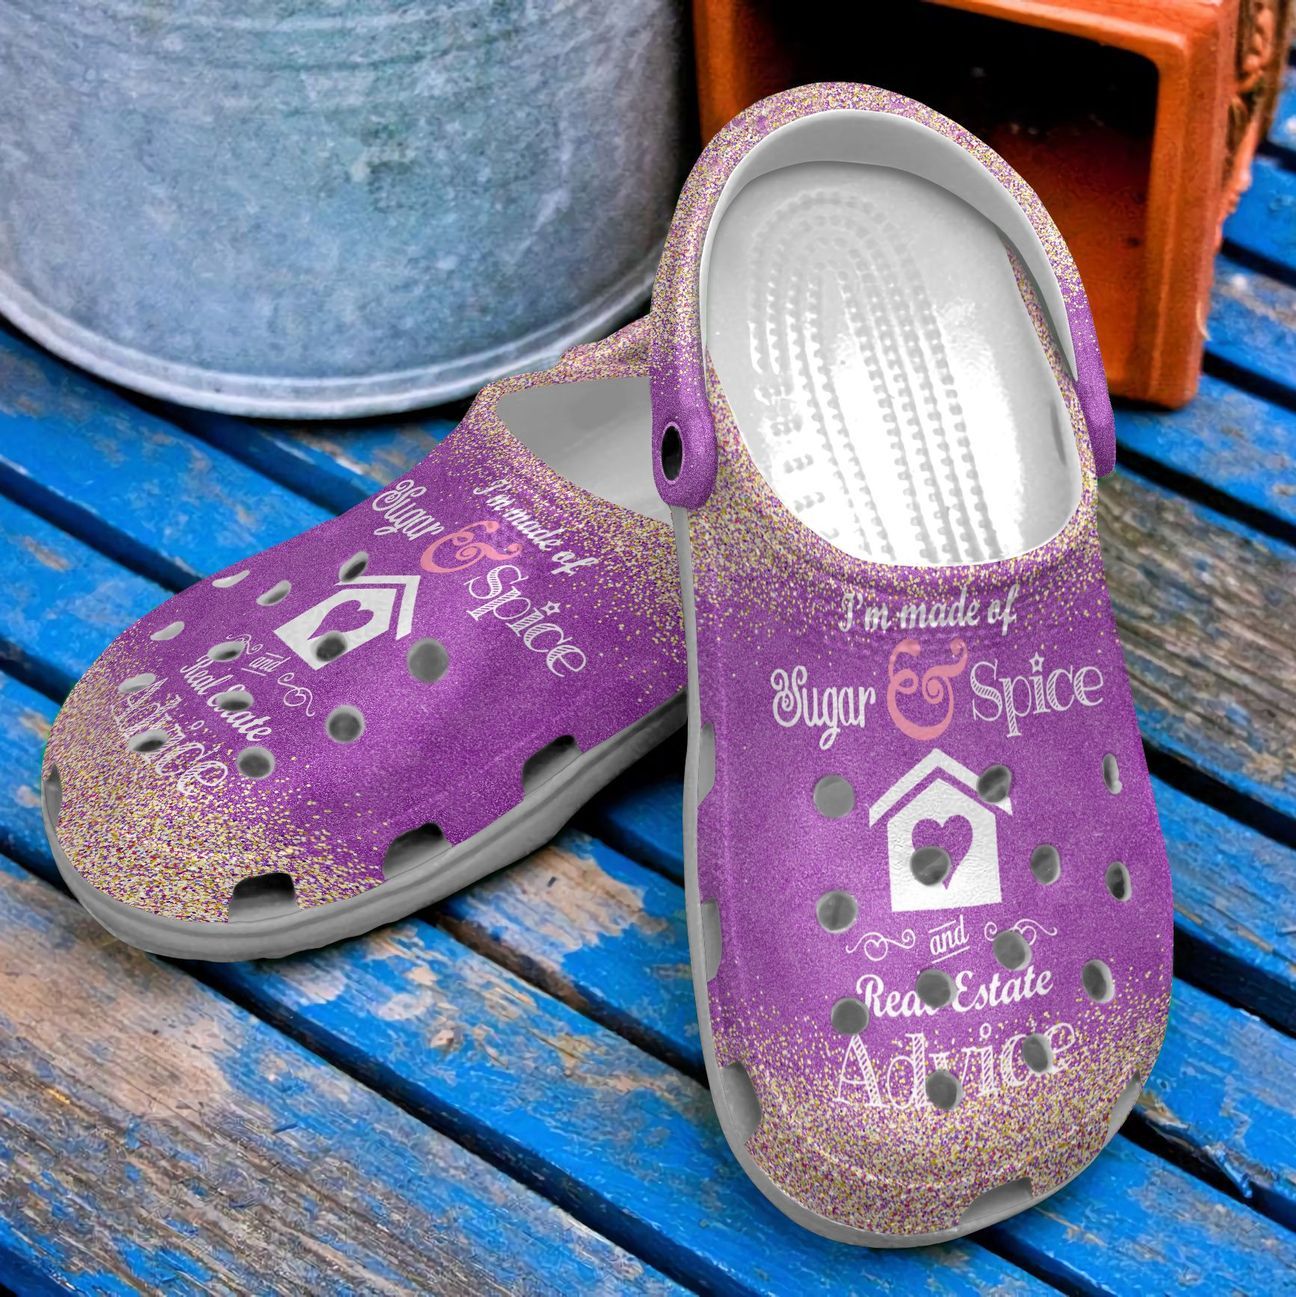 Real Estate Personalized Clog Custom Crocs Comfortablefashion Style Comfortable For Women Men Kid Print 3D Made Of Sugar And Spice